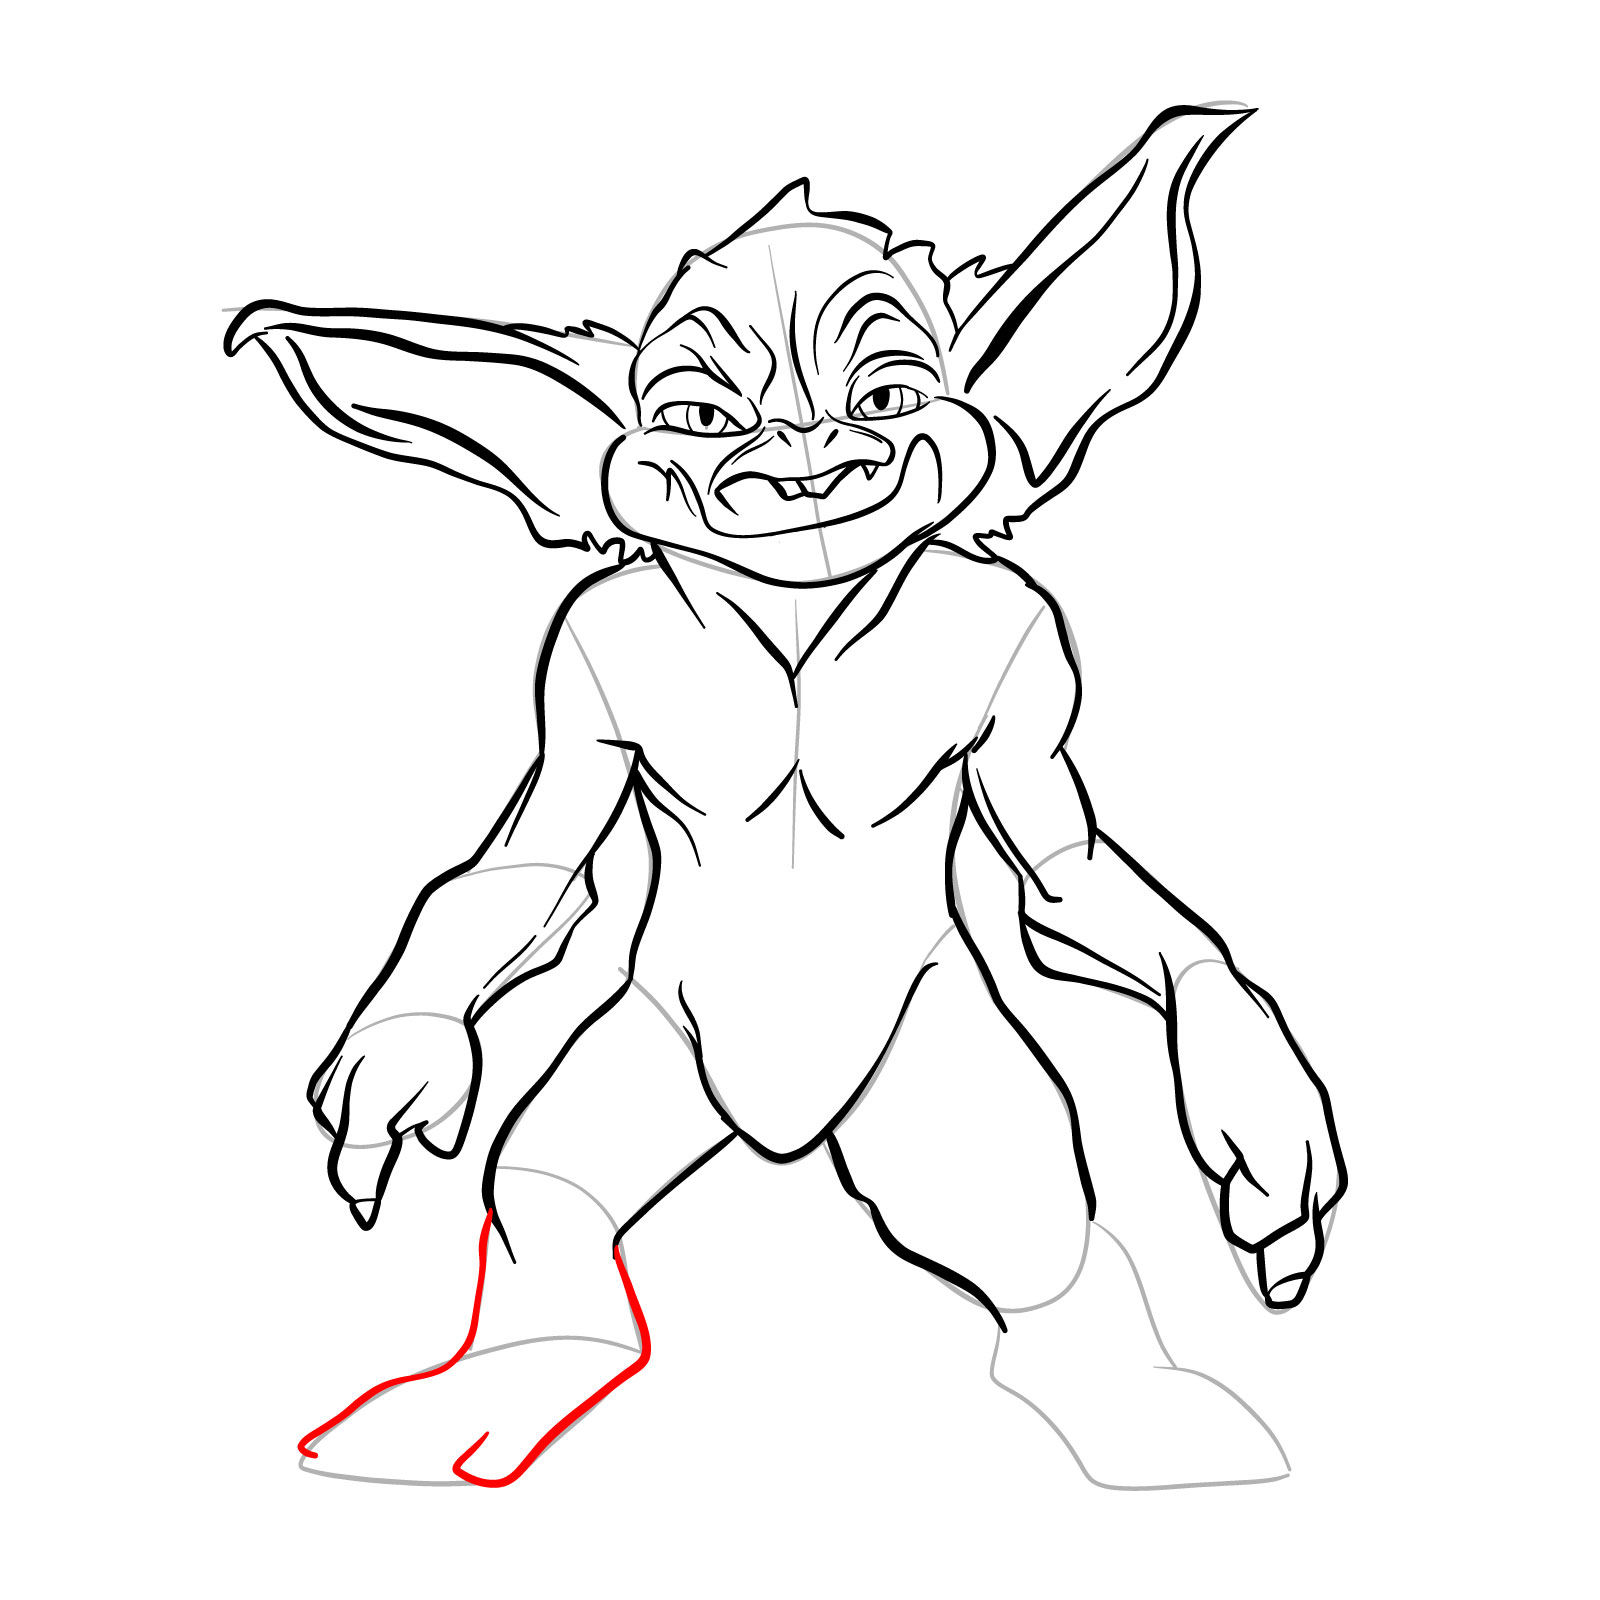 How to draw a Goblin - step 25